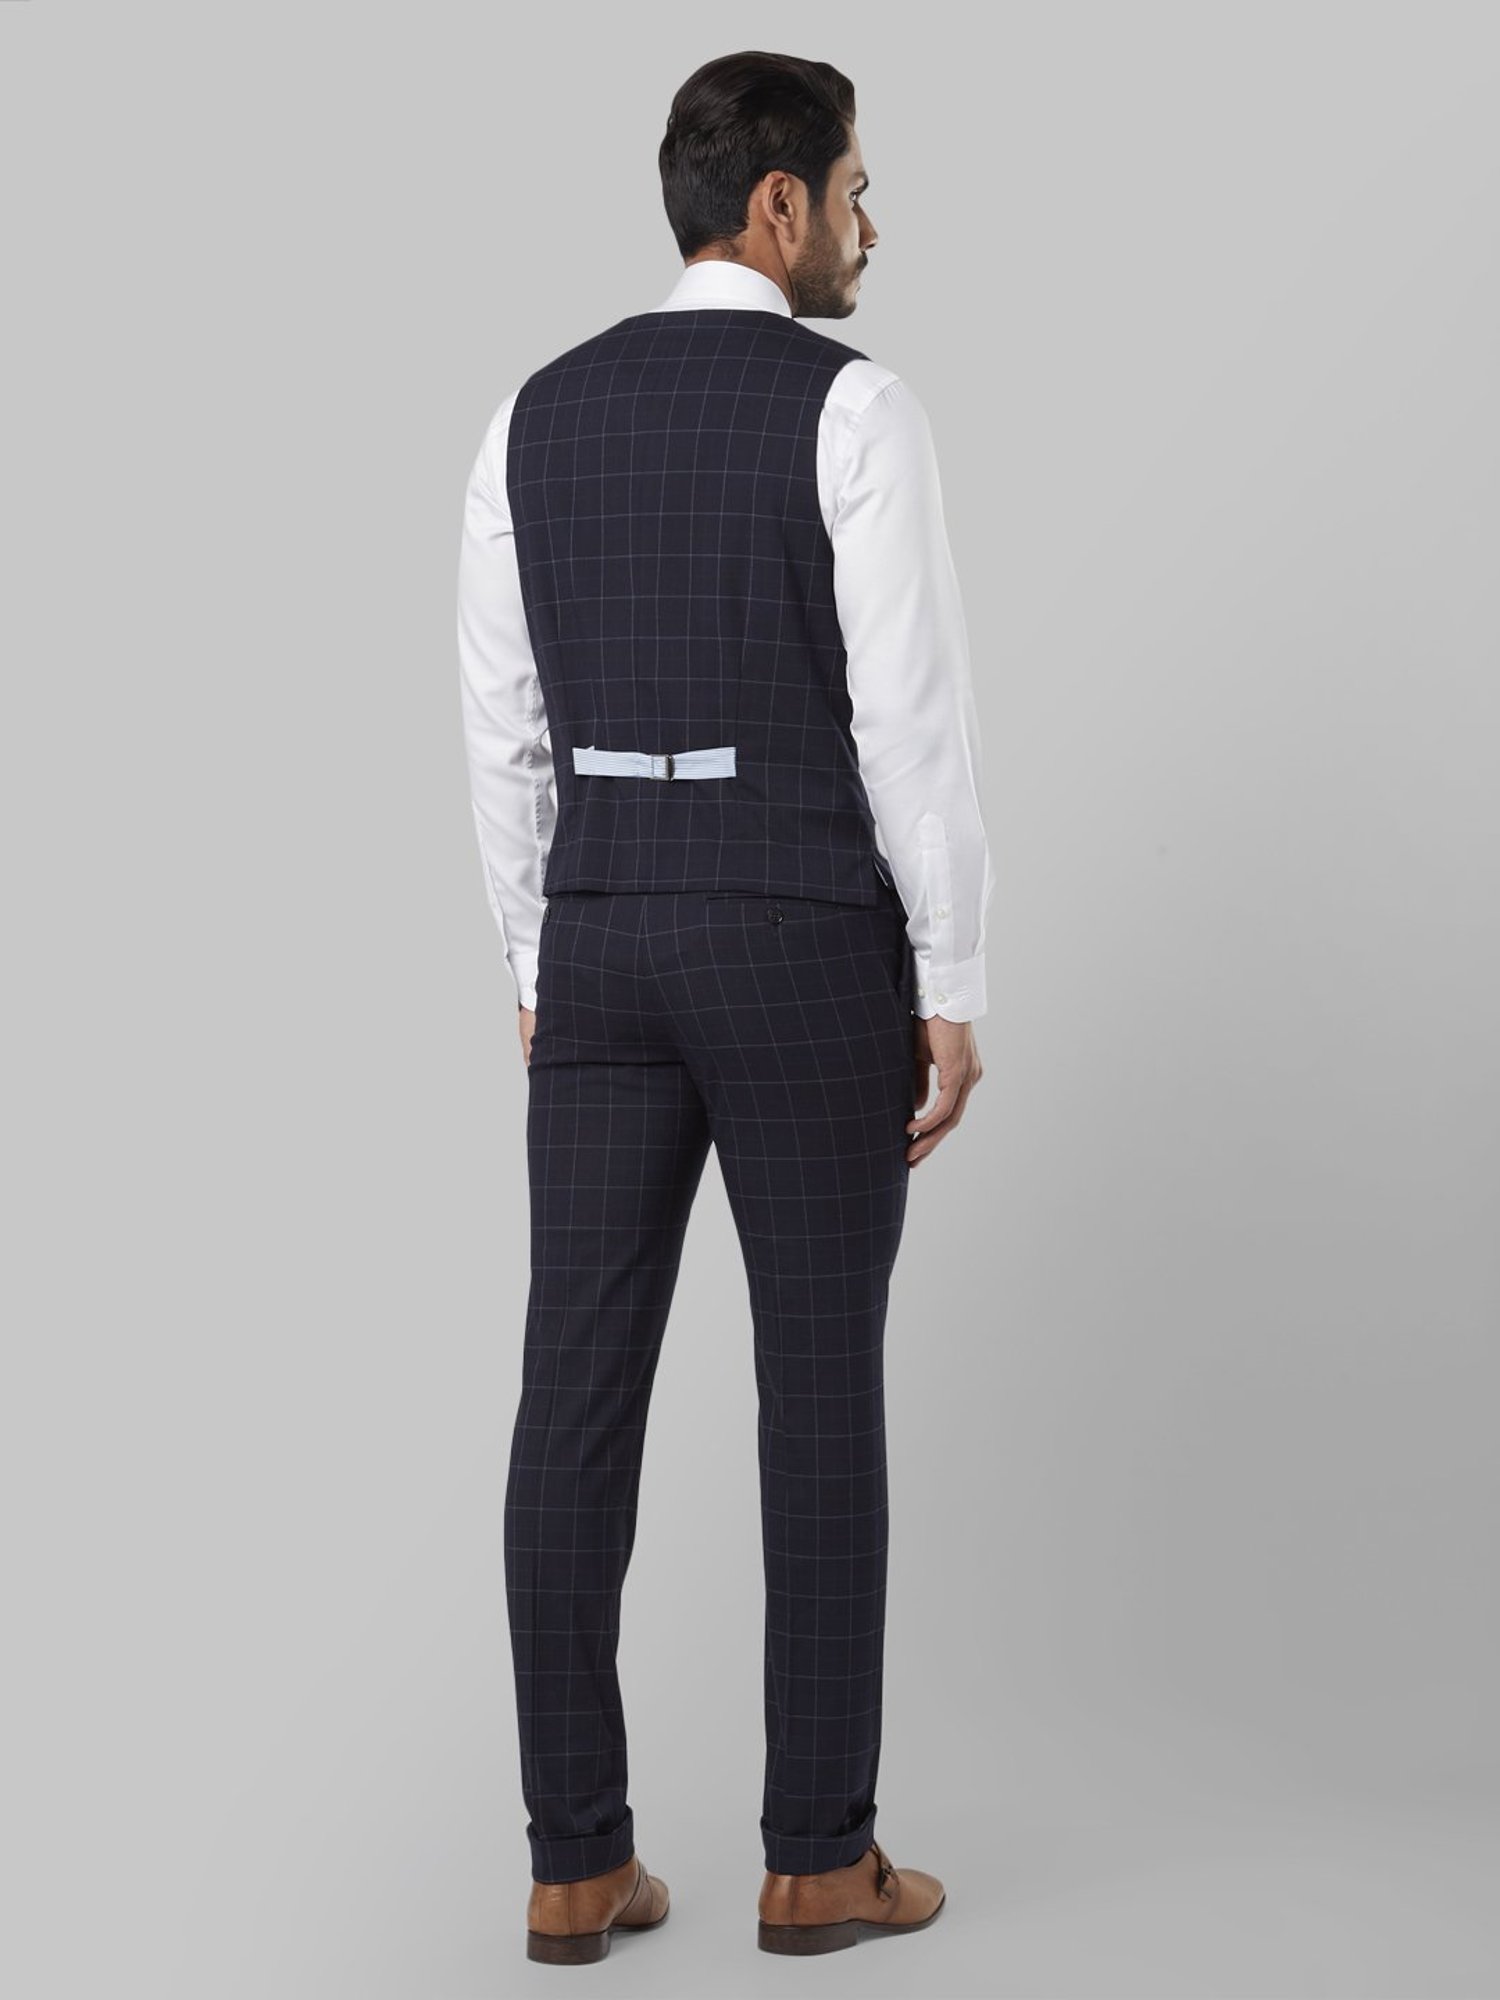 NEON GREEN SLIM CHECK SUIT JACKET WAISTCOAT AND TROUSERS  boohooMAN